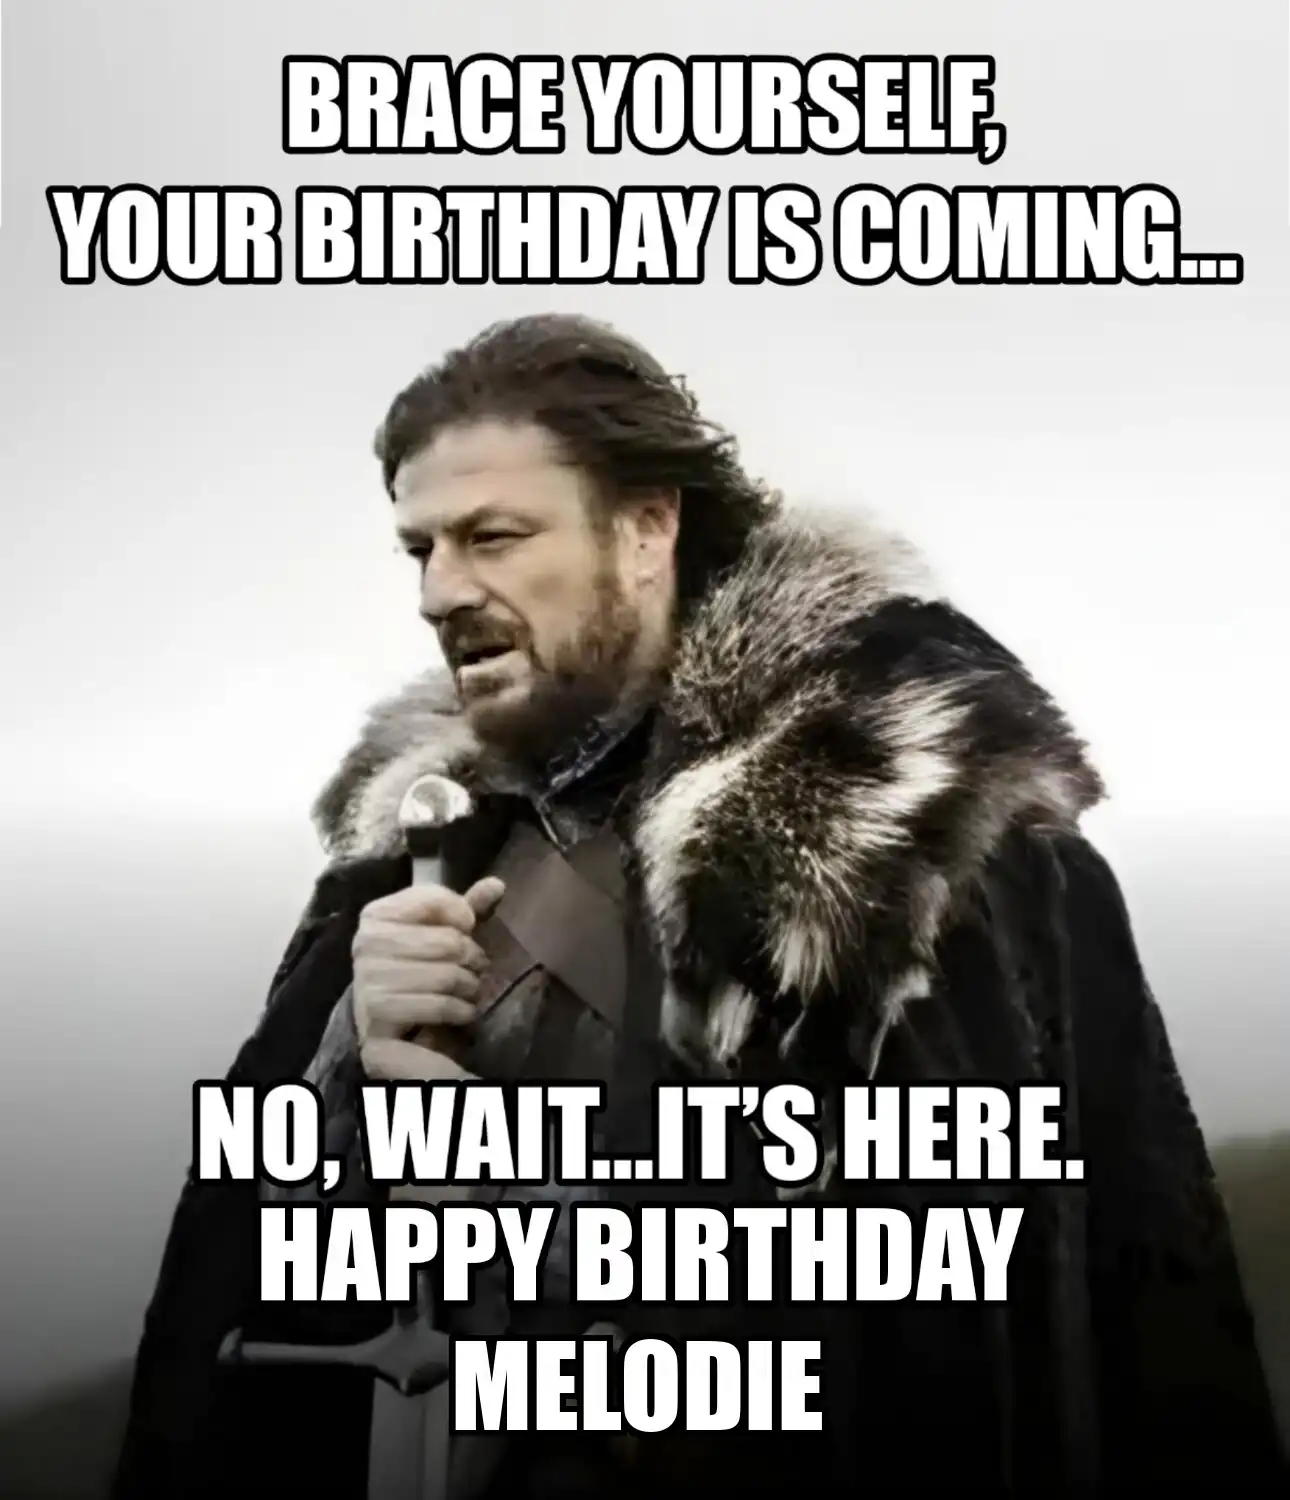 Happy Birthday Melodie Brace Yourself Your Birthday Is Coming Meme